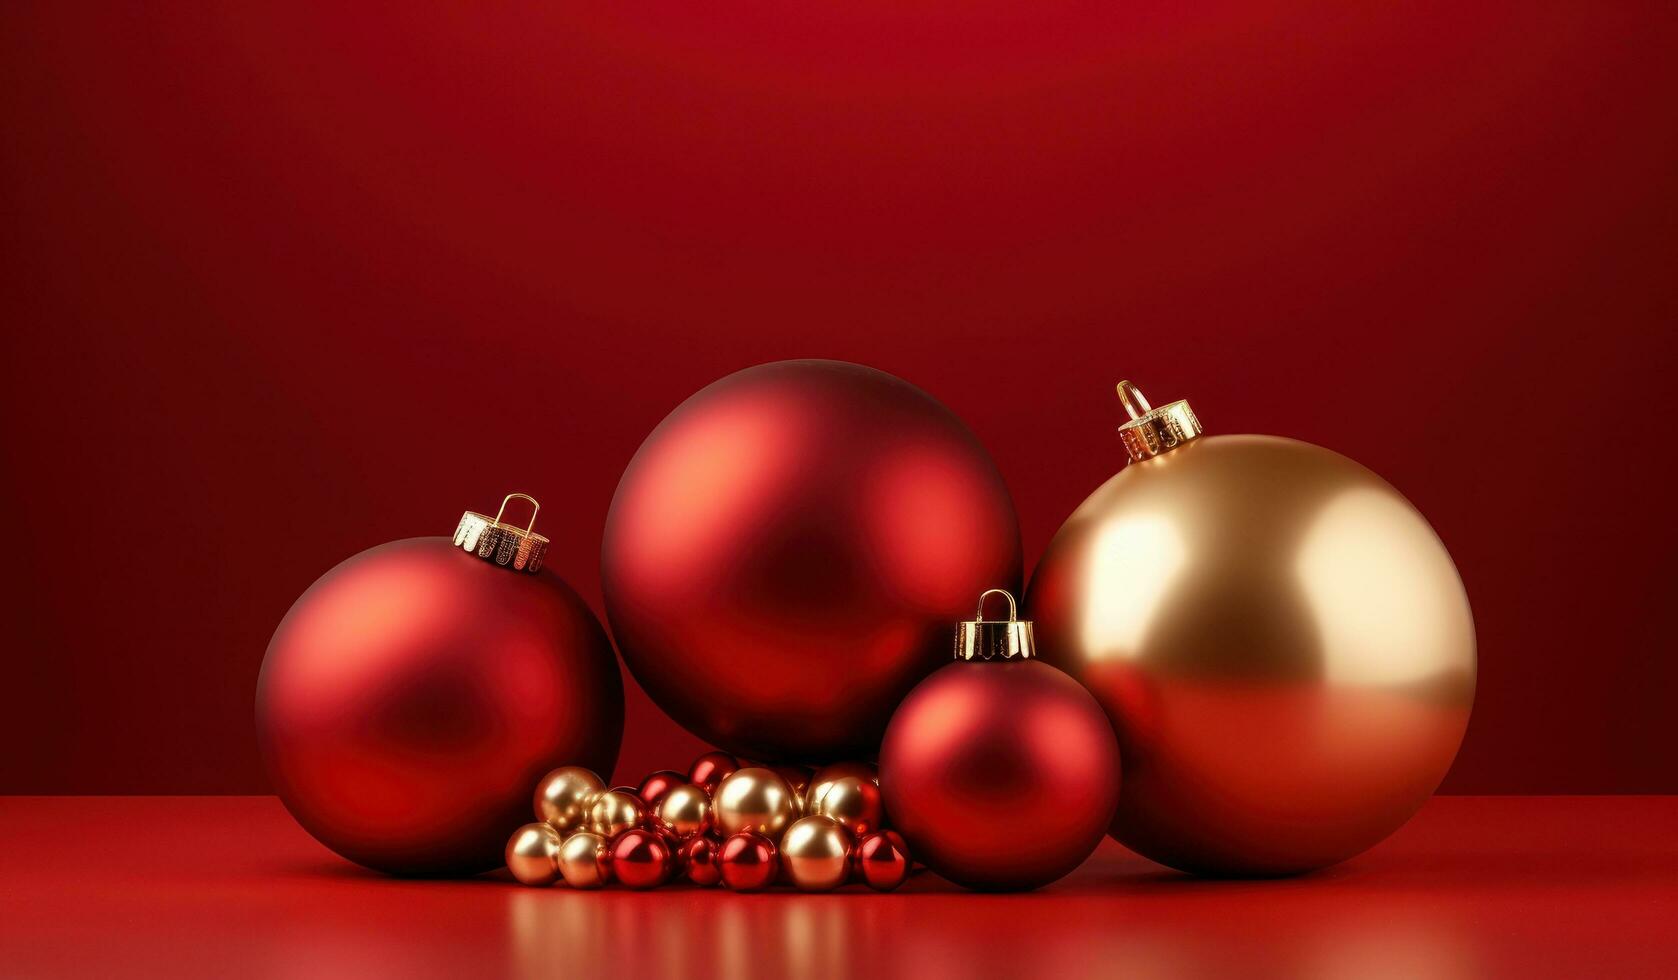 Christmas red background with golden balls photo